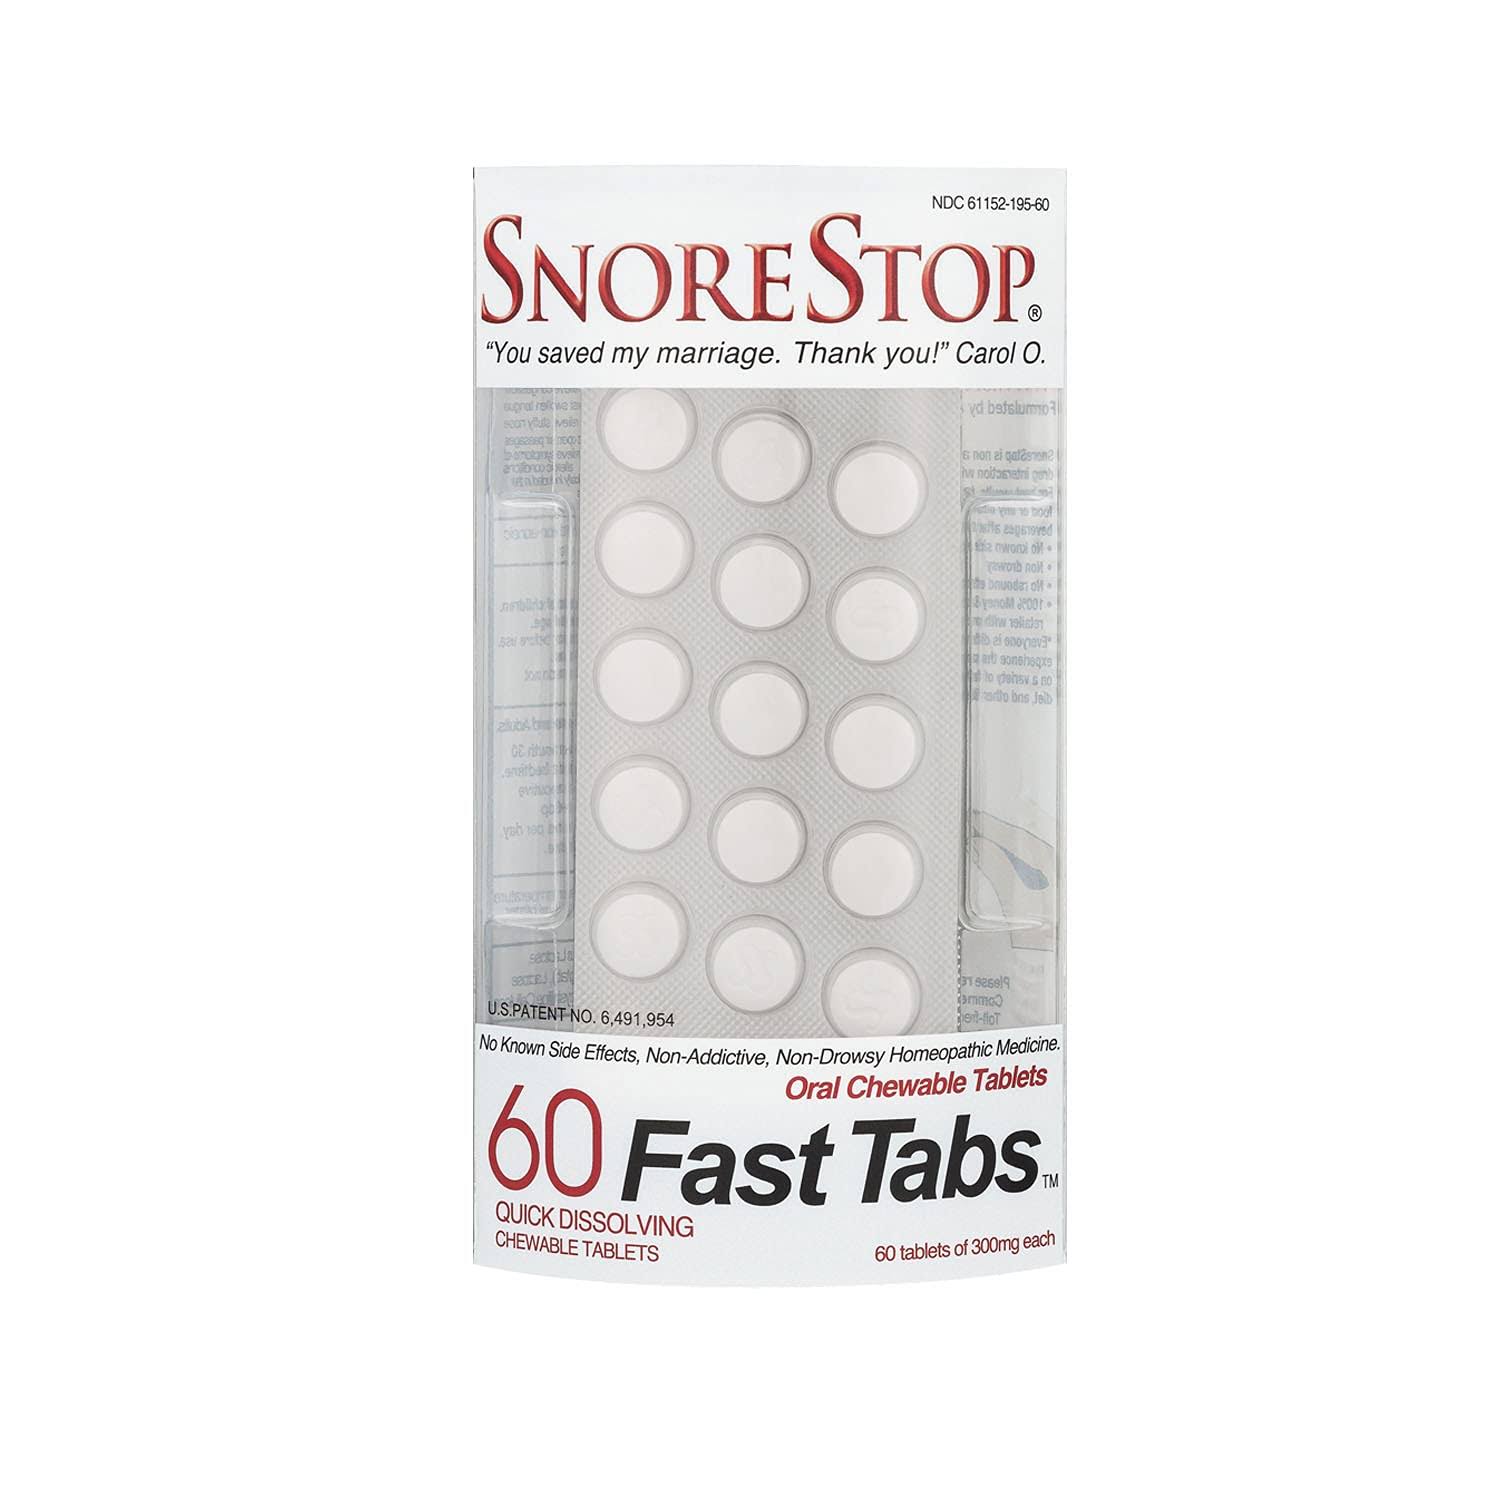 Snorestop Homeopathic Anti-Snoring Supplement - 60 Fast Tabs